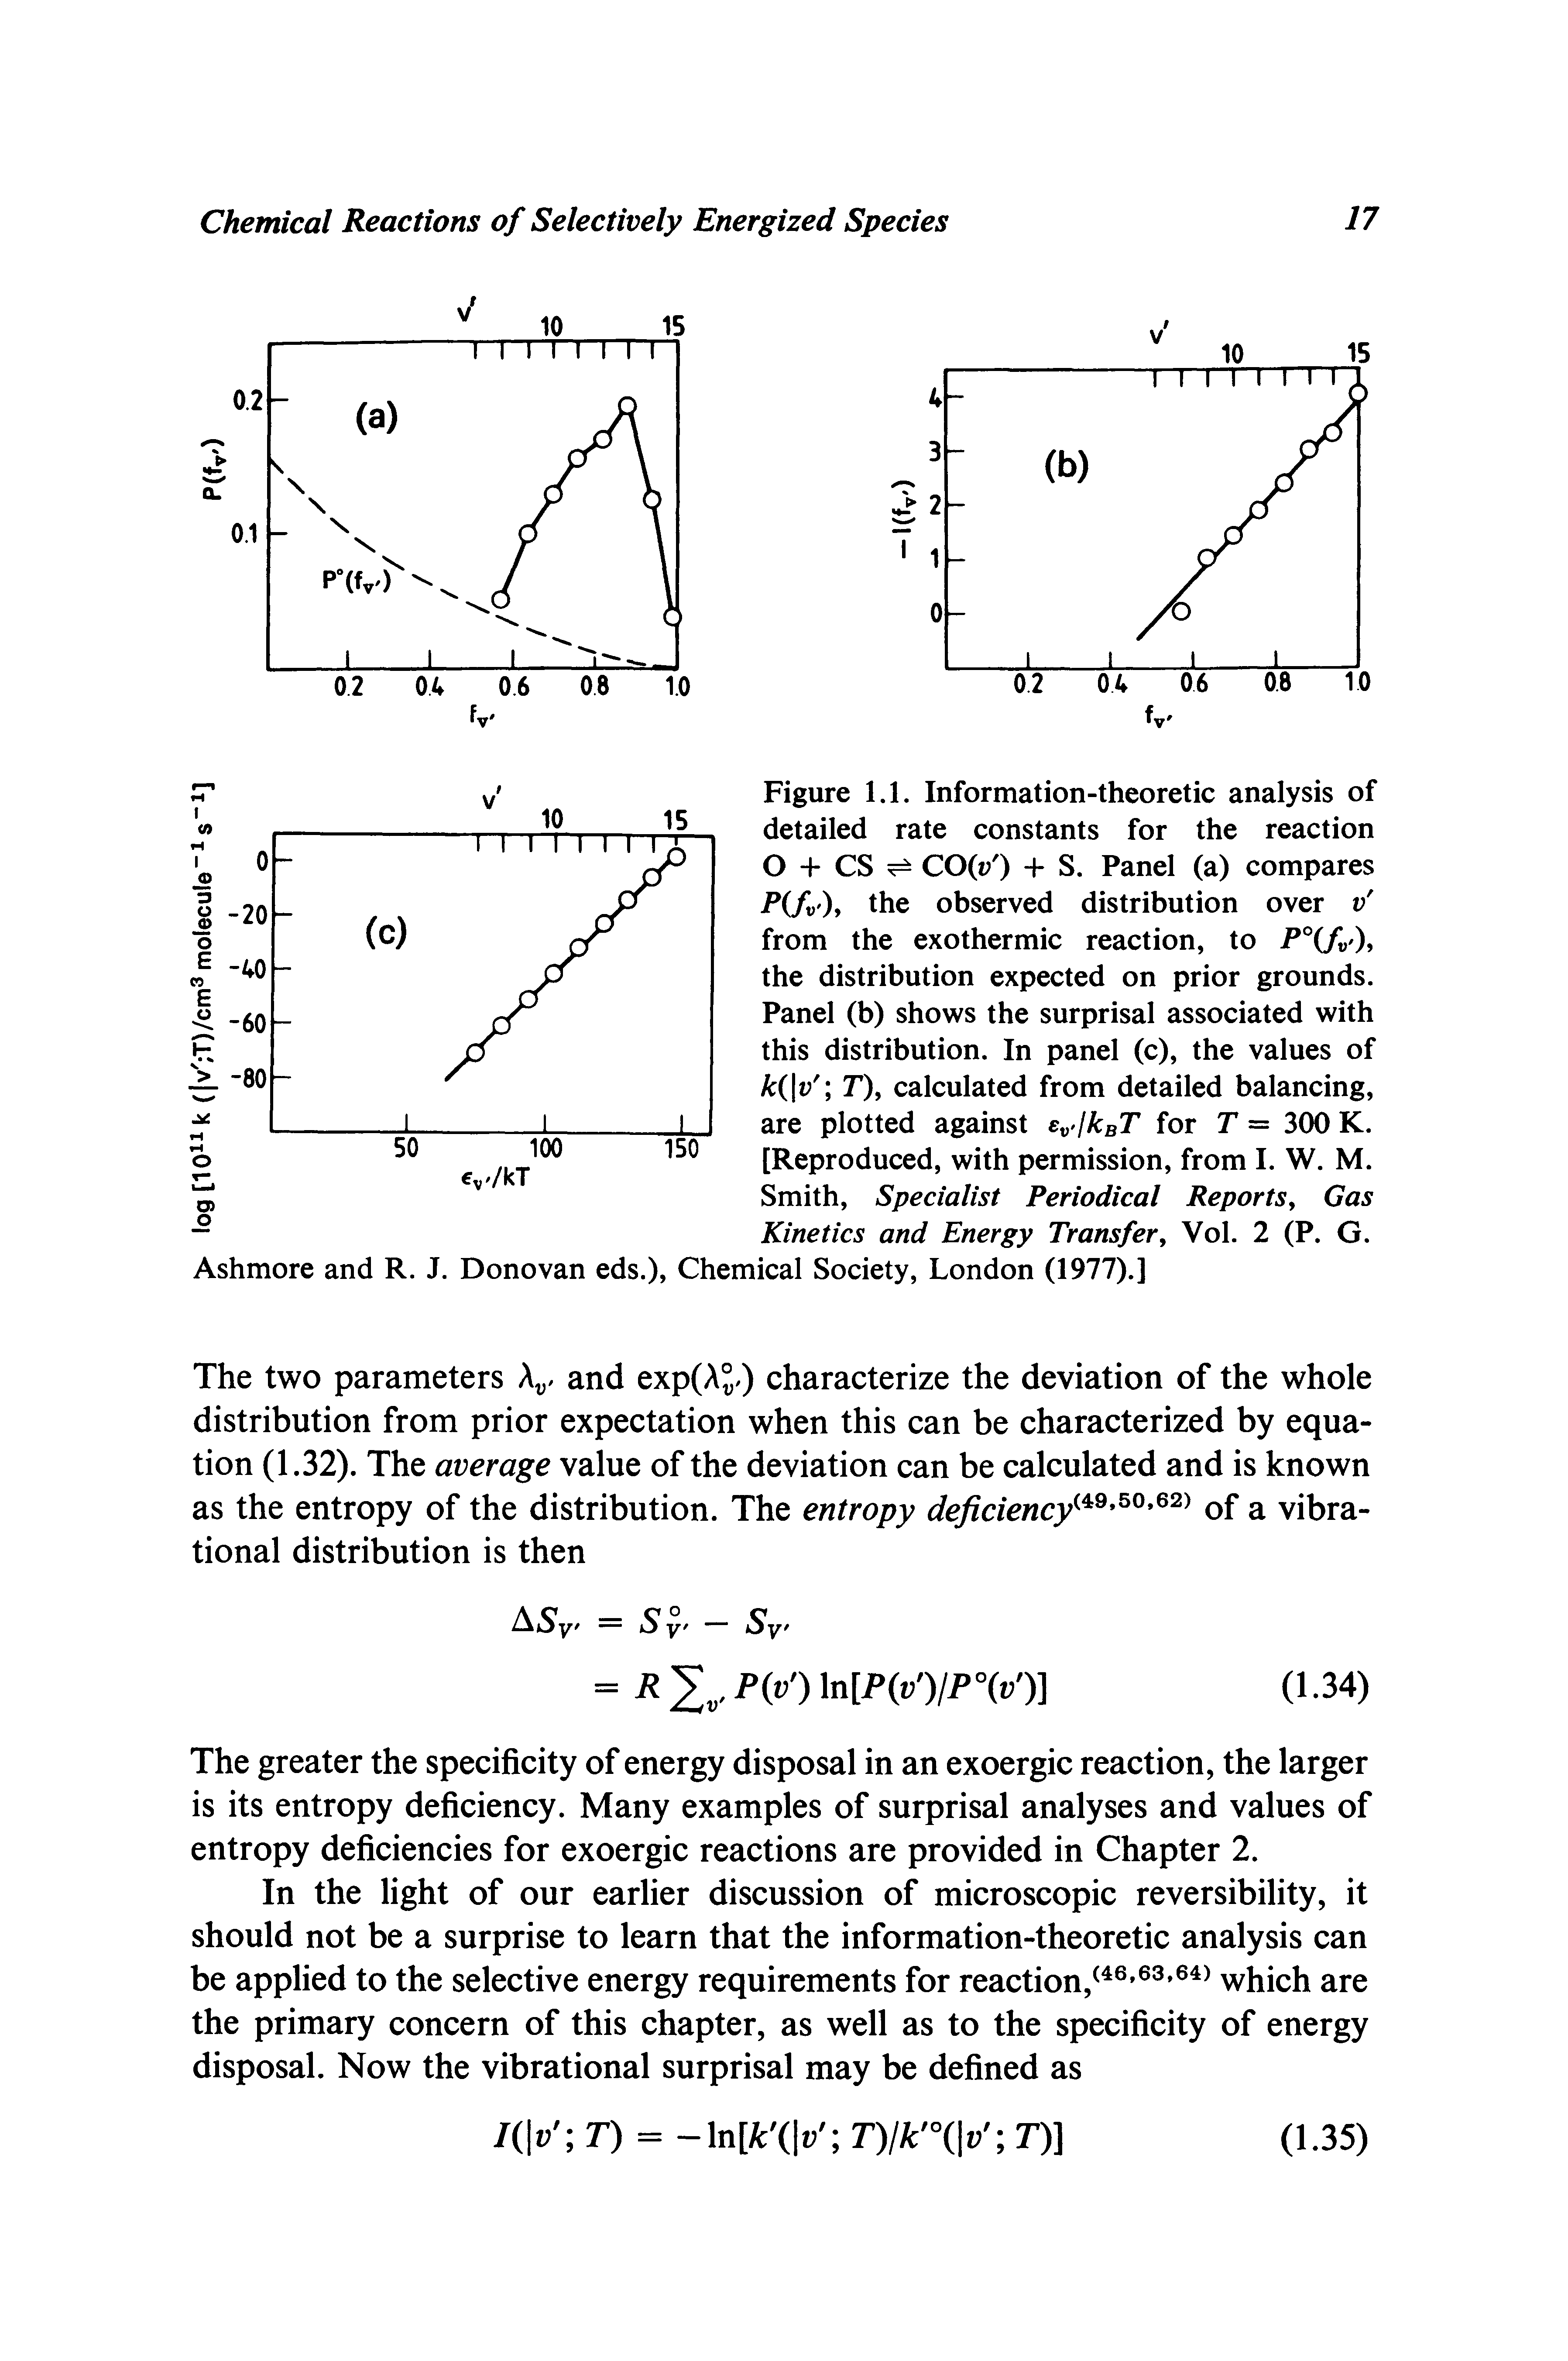 Figure 1.1. Information-theoretic analysis of detailed rate constants for the reaction O + CS CO(i ) + S. Panel (a) compares P(/v), the observed distribution over v from the exothermic reaction, to the distribution expected on prior grounds. Panel (b) shows the surprisal associated with this distribution. In panel (c), the values of ki v r), calculated from detailed balancing, are plotted against e lksT for T = 300 K. [Reproduced, with permission, from I. W. M. Smith, Specialist Periodical Reports Gas Kinetics and Energy Transfer Vol. 2 (P. G. Ashmore and R. J. Donovan eds.). Chemical Society, London (1977).]...